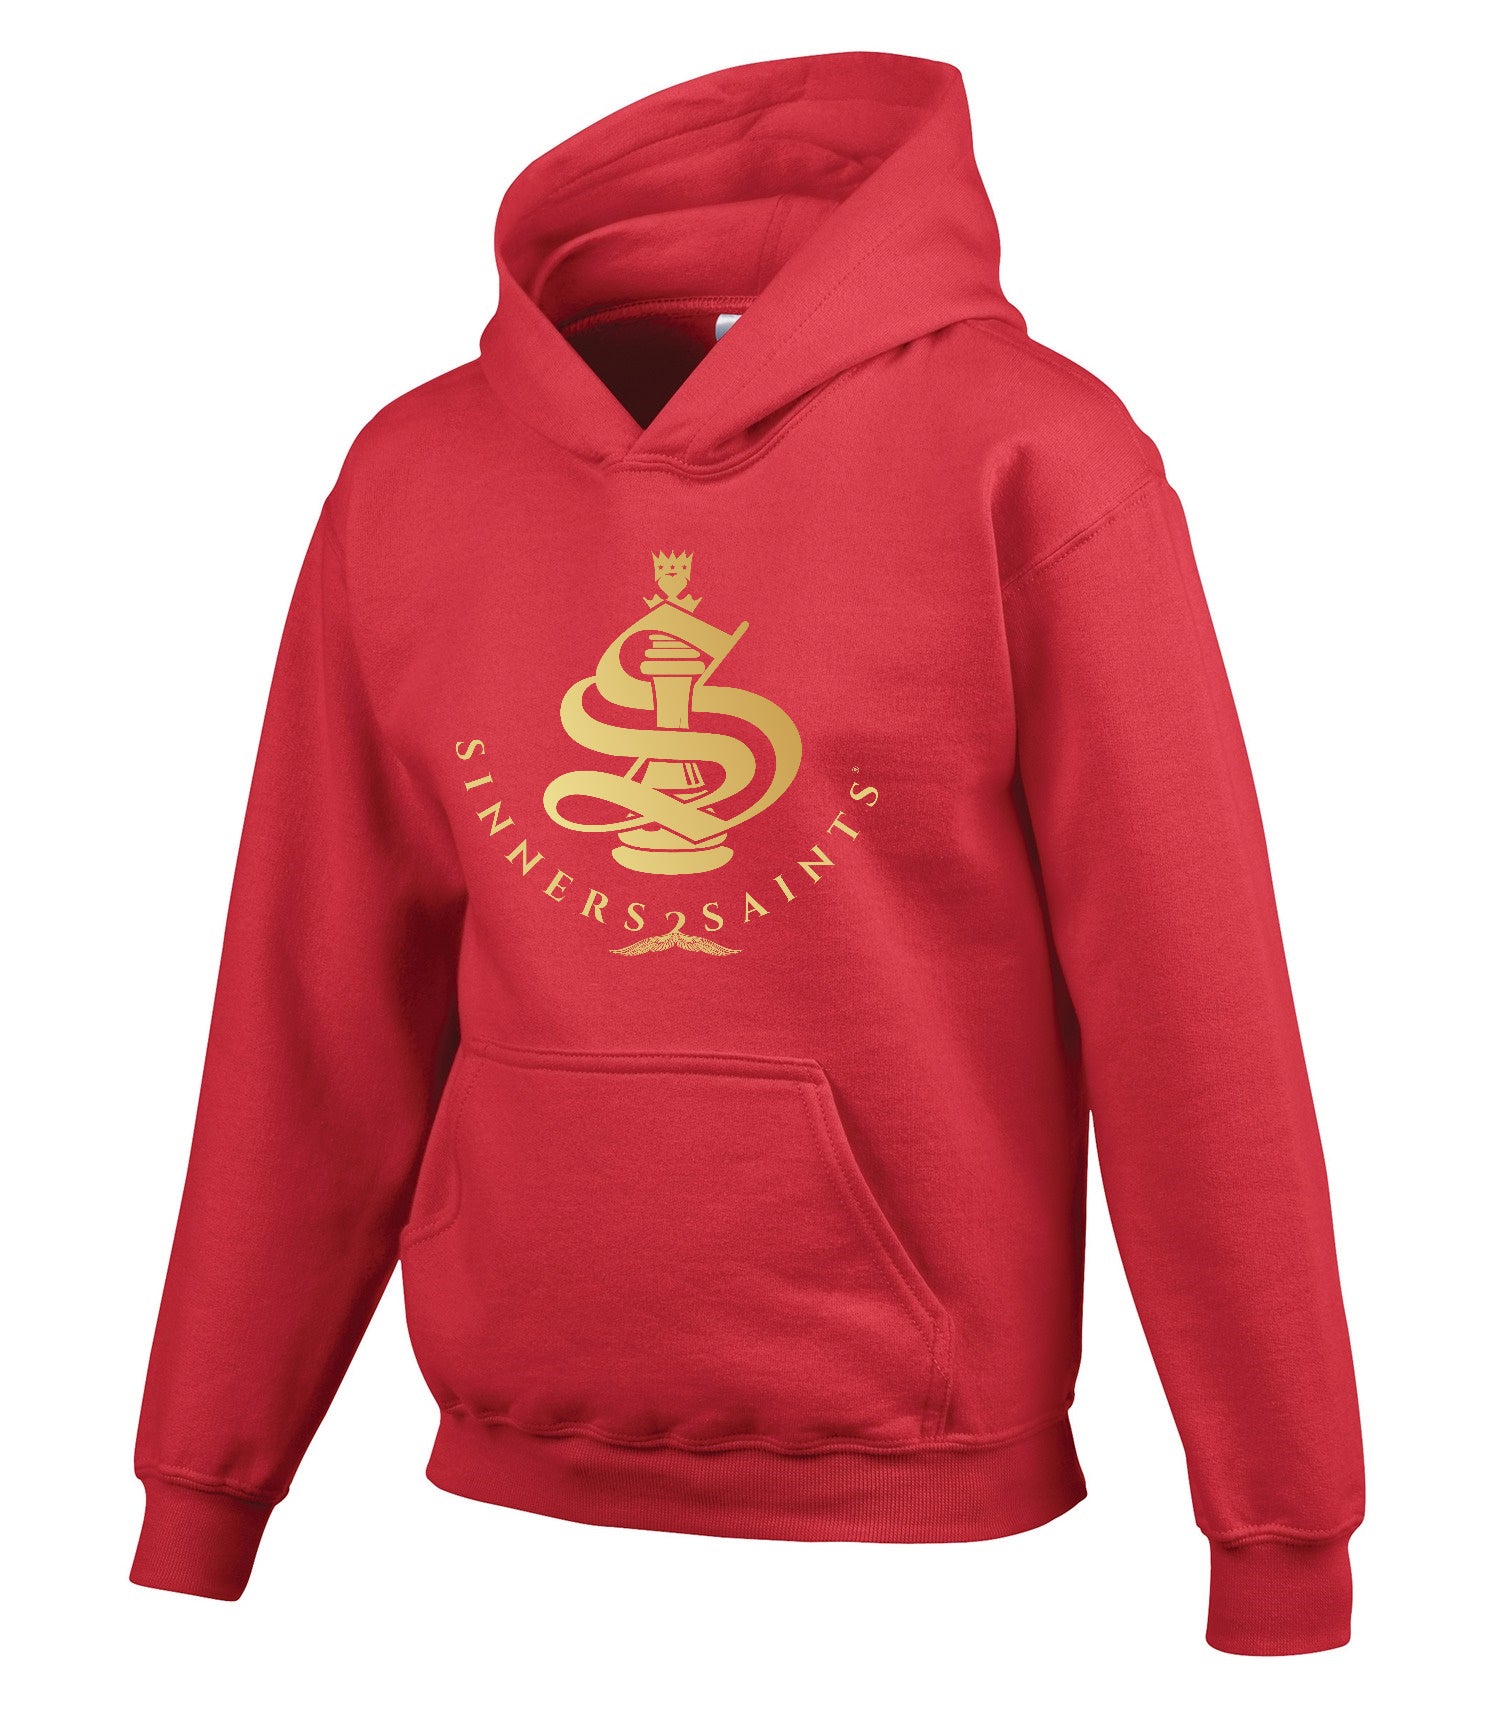 Youth Logo Hoodie (Different colors available) - TheSinners2Saints